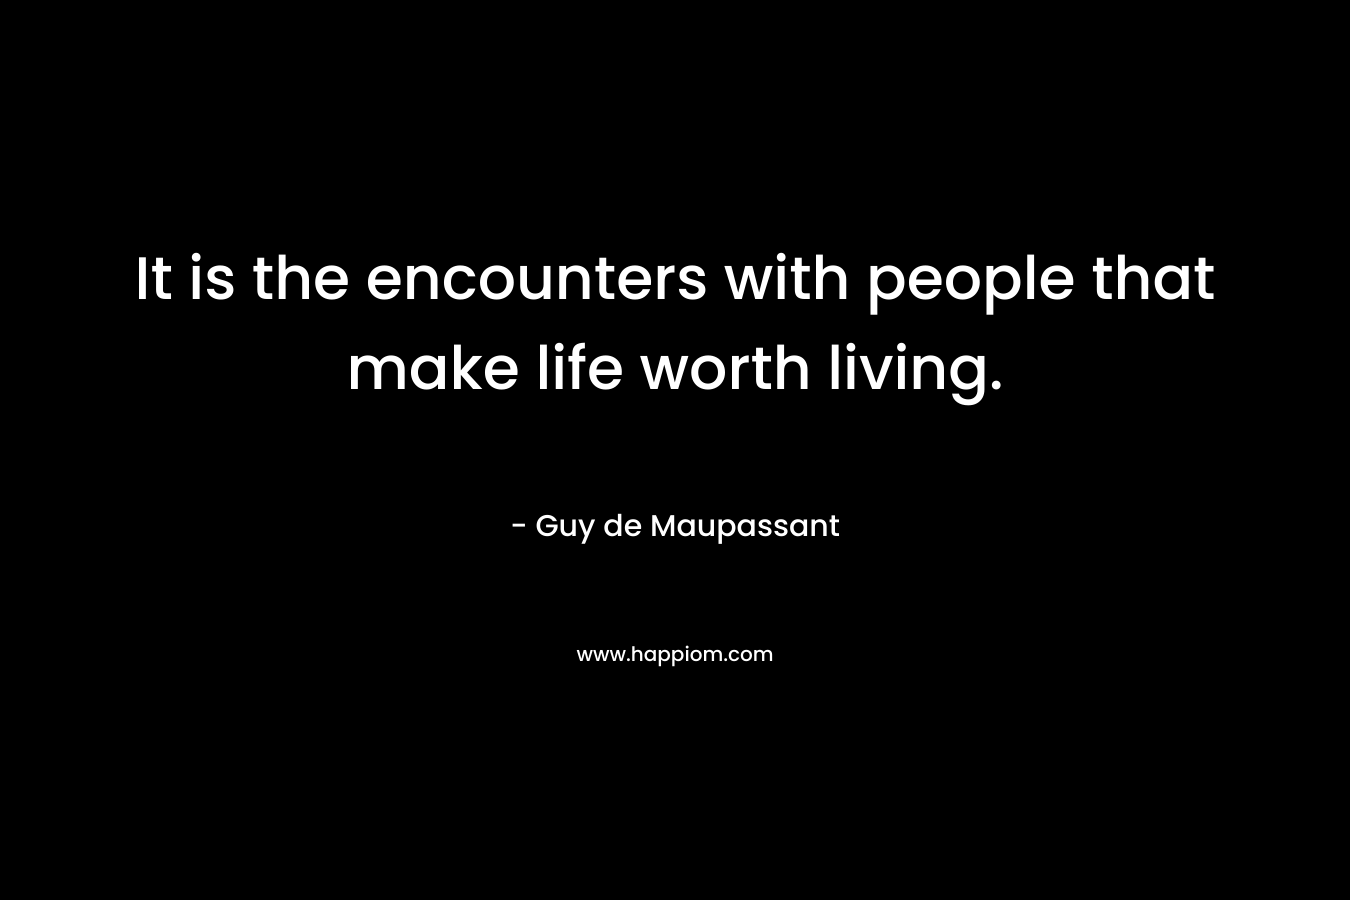 It is the encounters with people that make life worth living. – Guy de Maupassant